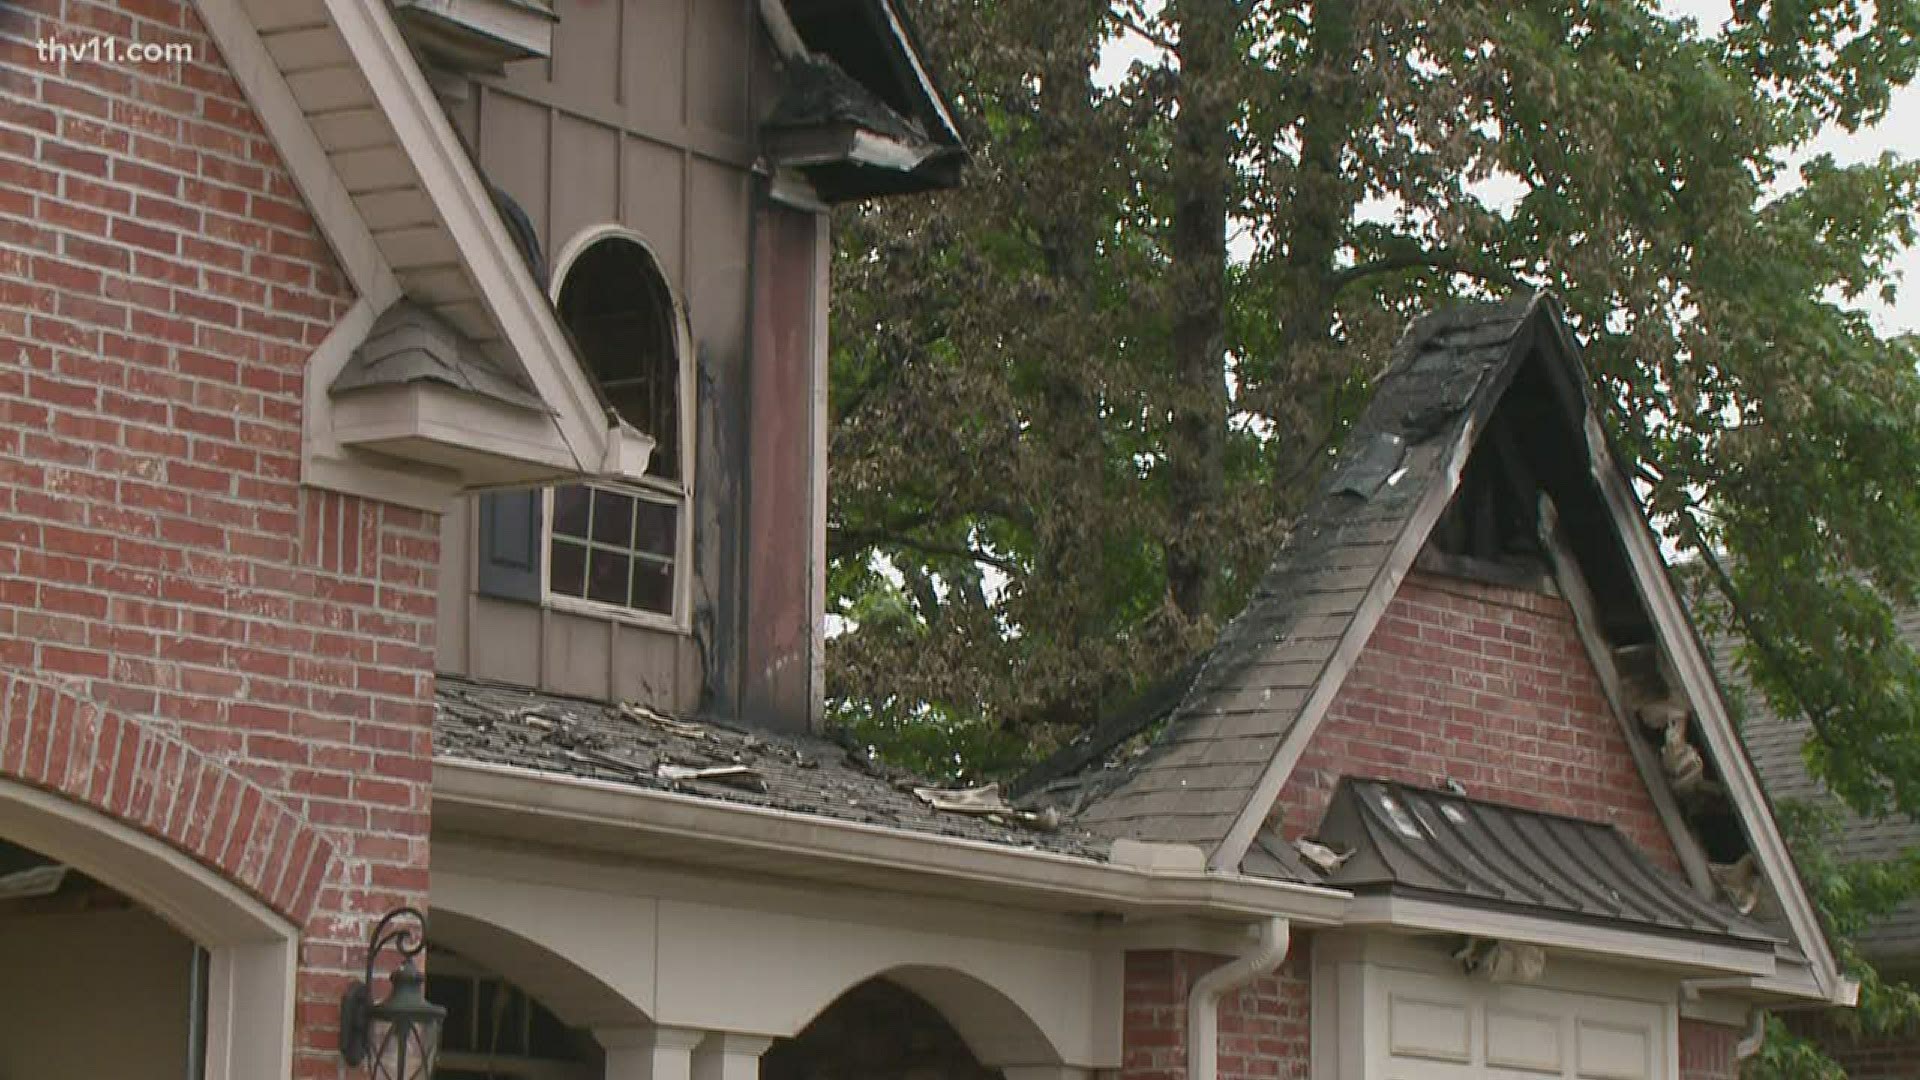 Two houses in different neighborhoods caught fire overnight. Lightning could be the reason.